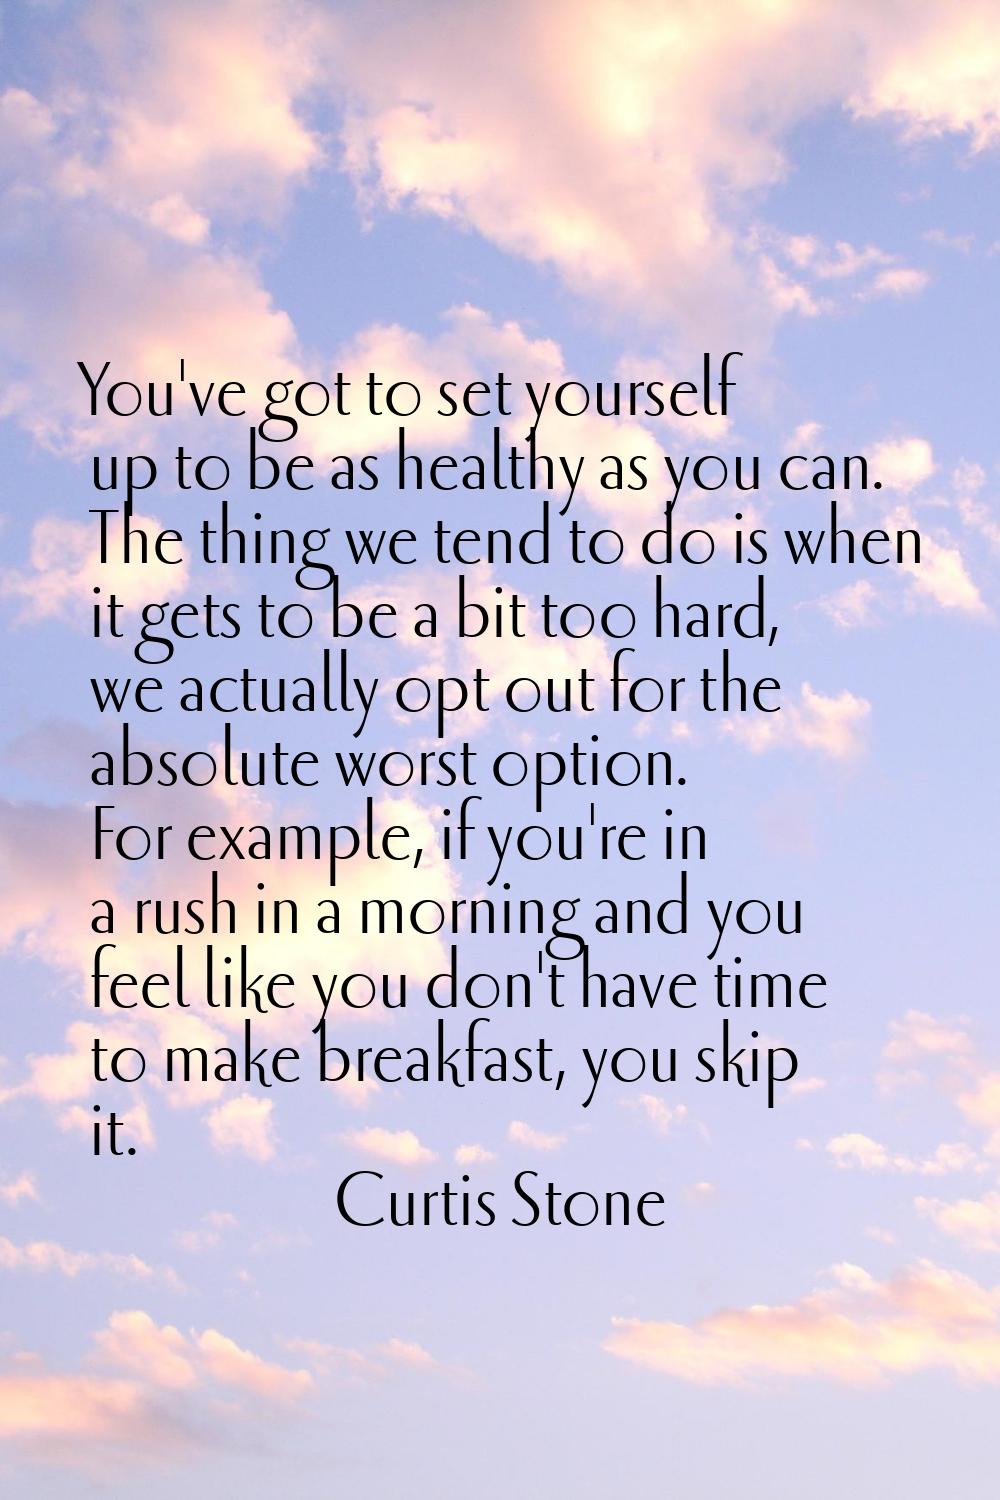 You've got to set yourself up to be as healthy as you can. The thing we tend to do is when it gets 